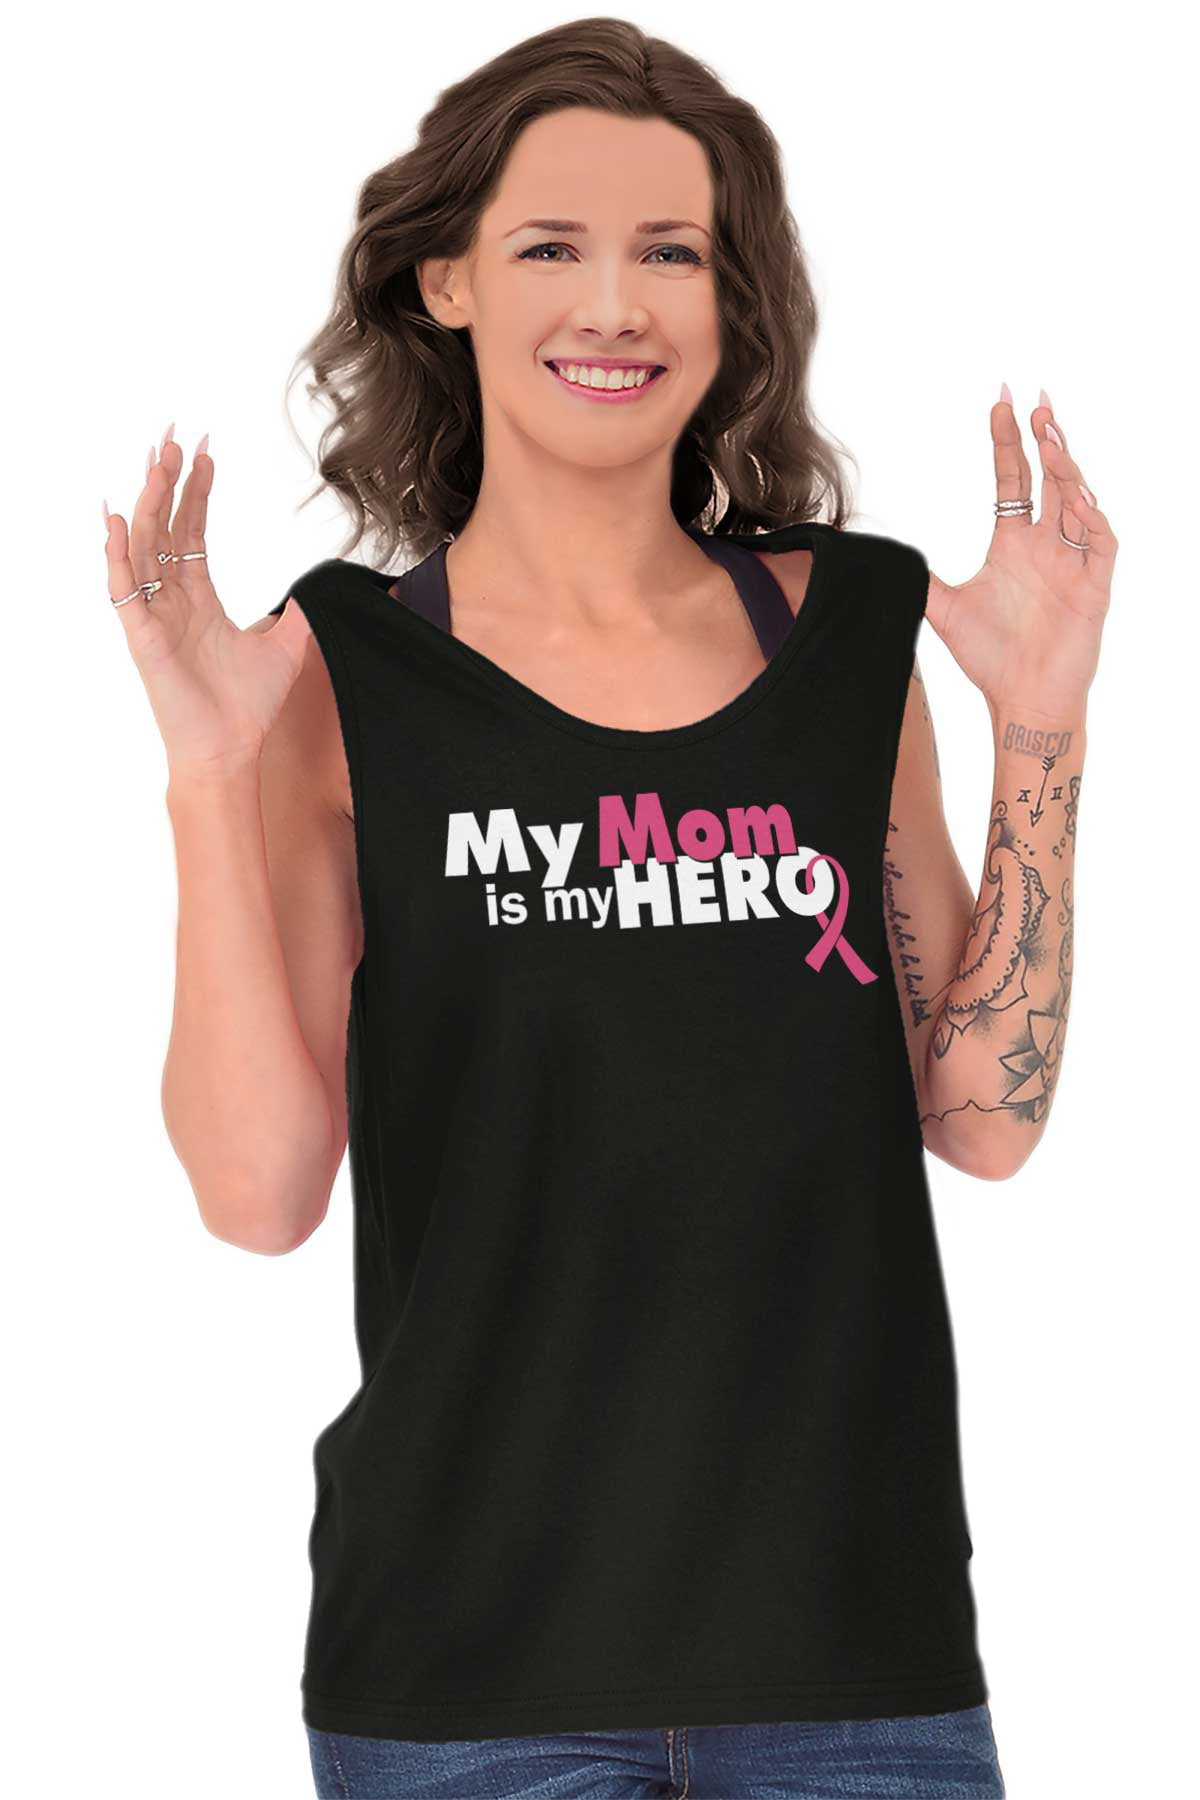 Brisco Brands Breast Cancer Awareness Tank Tops T Shirts Tees For Womens My Mom Is My Hero